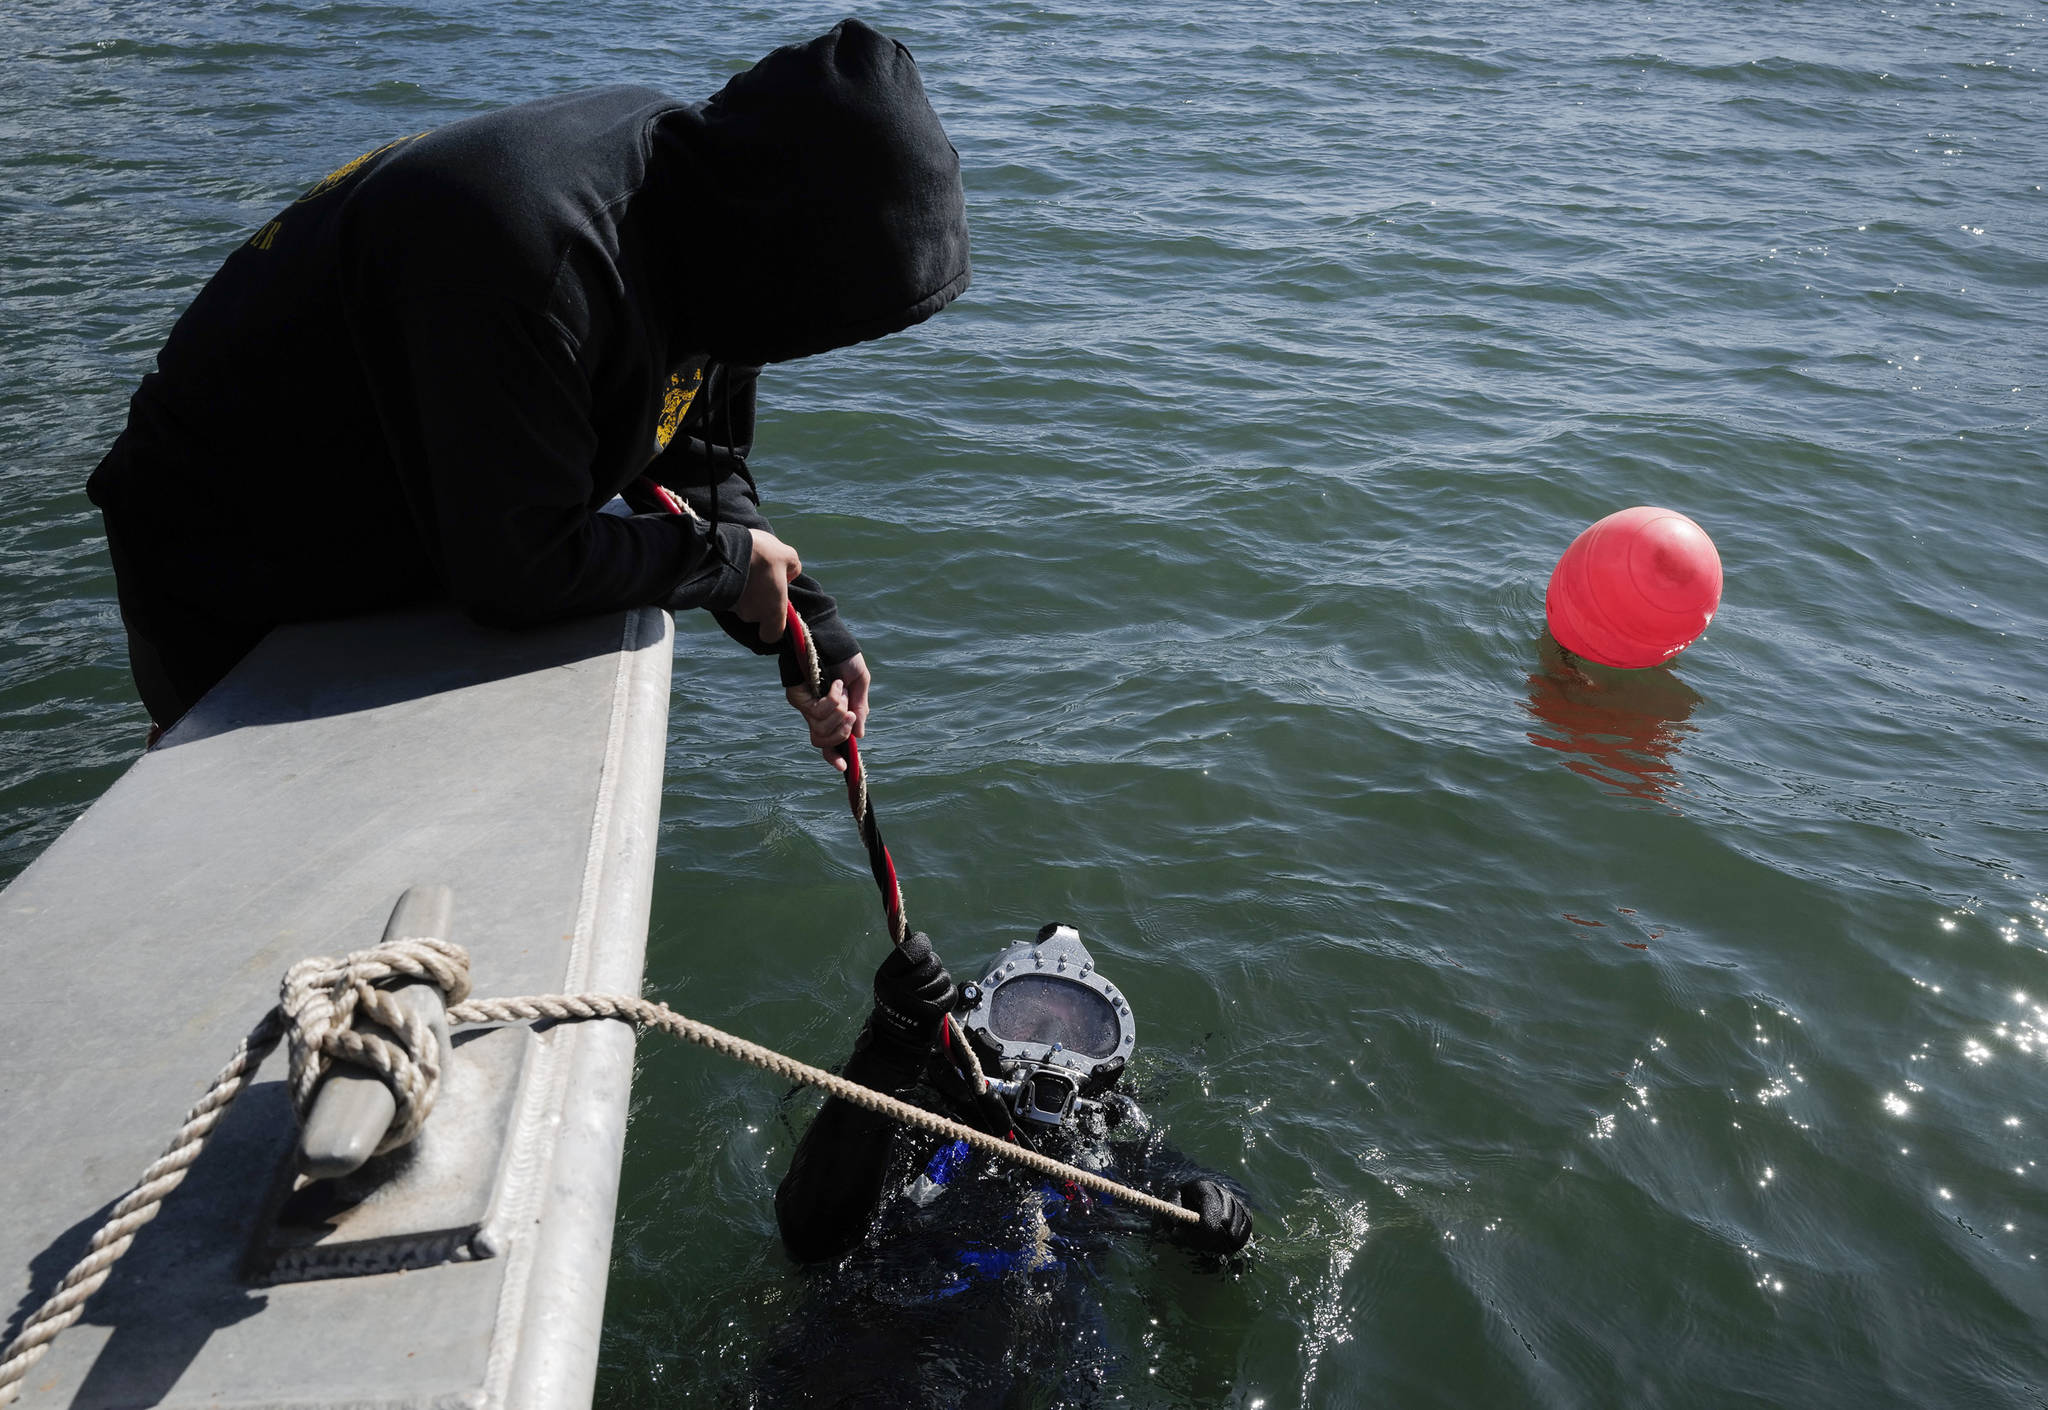 Members of the Army’s 74th Engineer Dive Detachment work off a Juneau Harbormaster boat to retrieve lost crab pots in Gastineau Channel for the Douglas Indian Association/NOAA Marine Debris Project on Thursday, Sept. 5, 2019. The project aims to identify and remove derelict crab pots and their continued negative impact on wildlife and the environment. (Michael Penn | Juneau Empire)